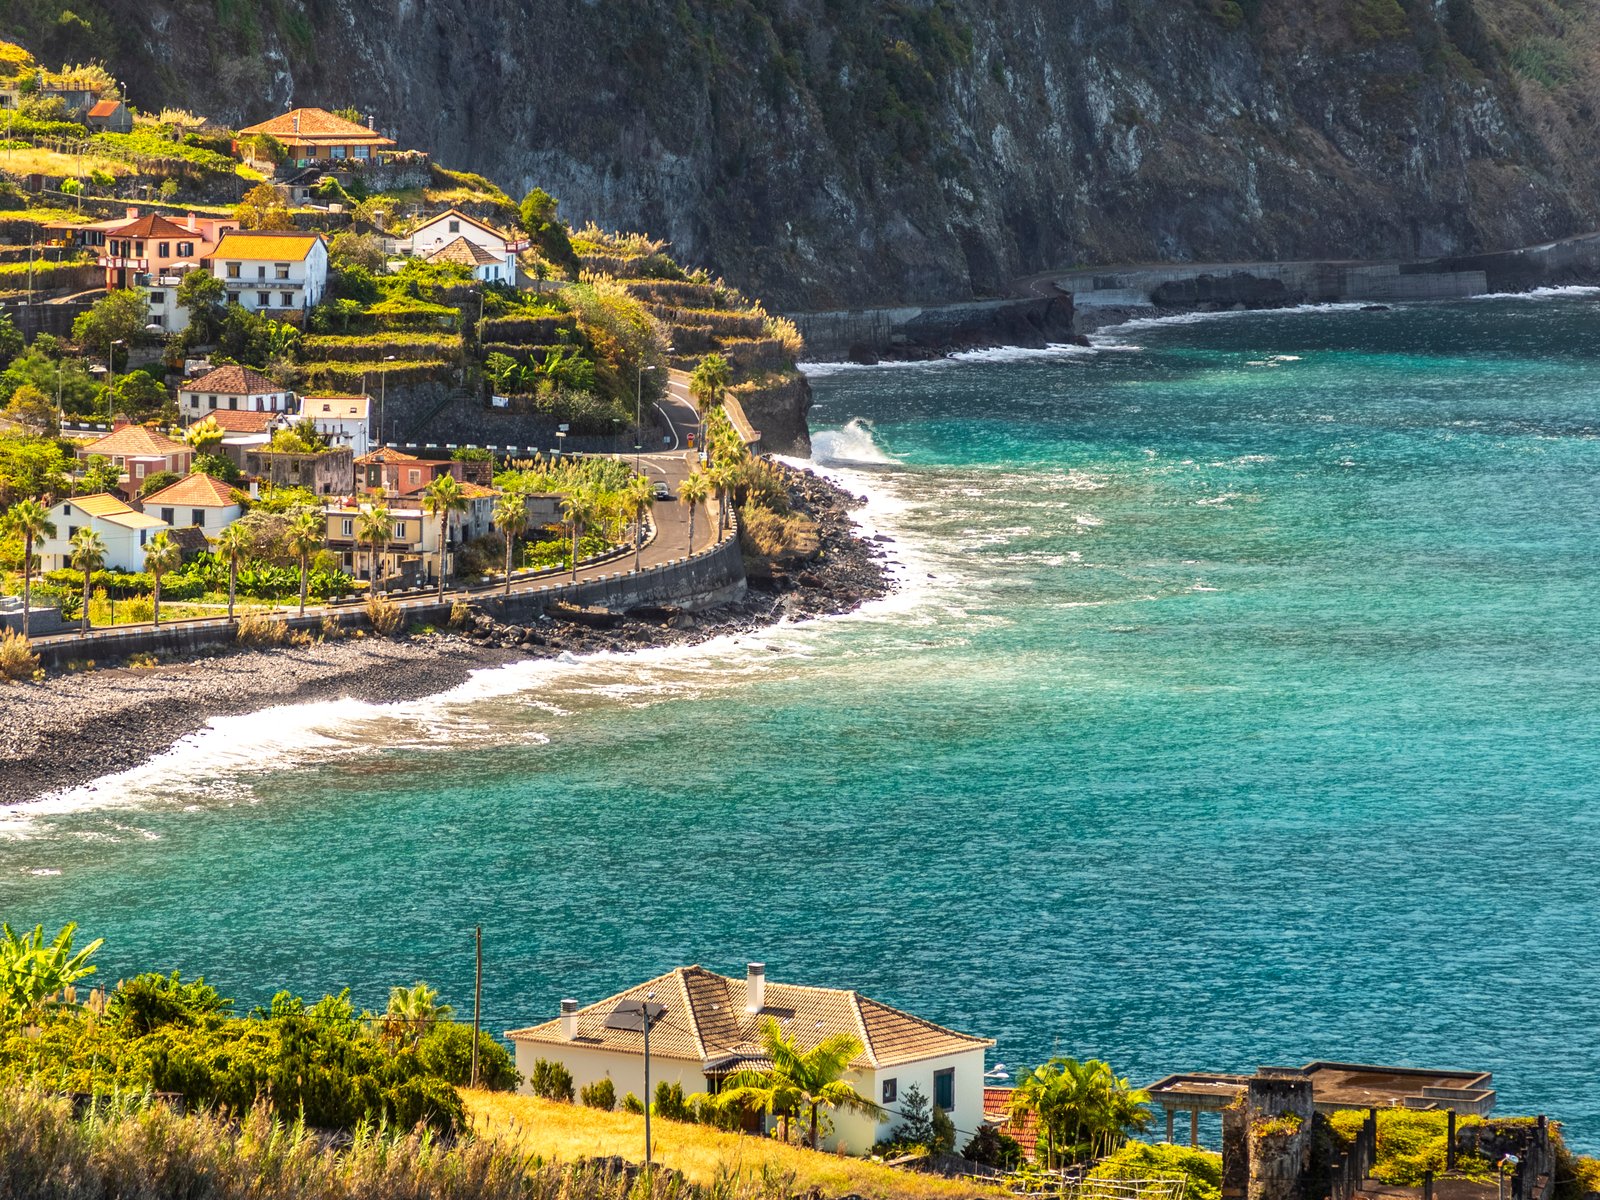 The island of Madeira in summer.&nbsp;